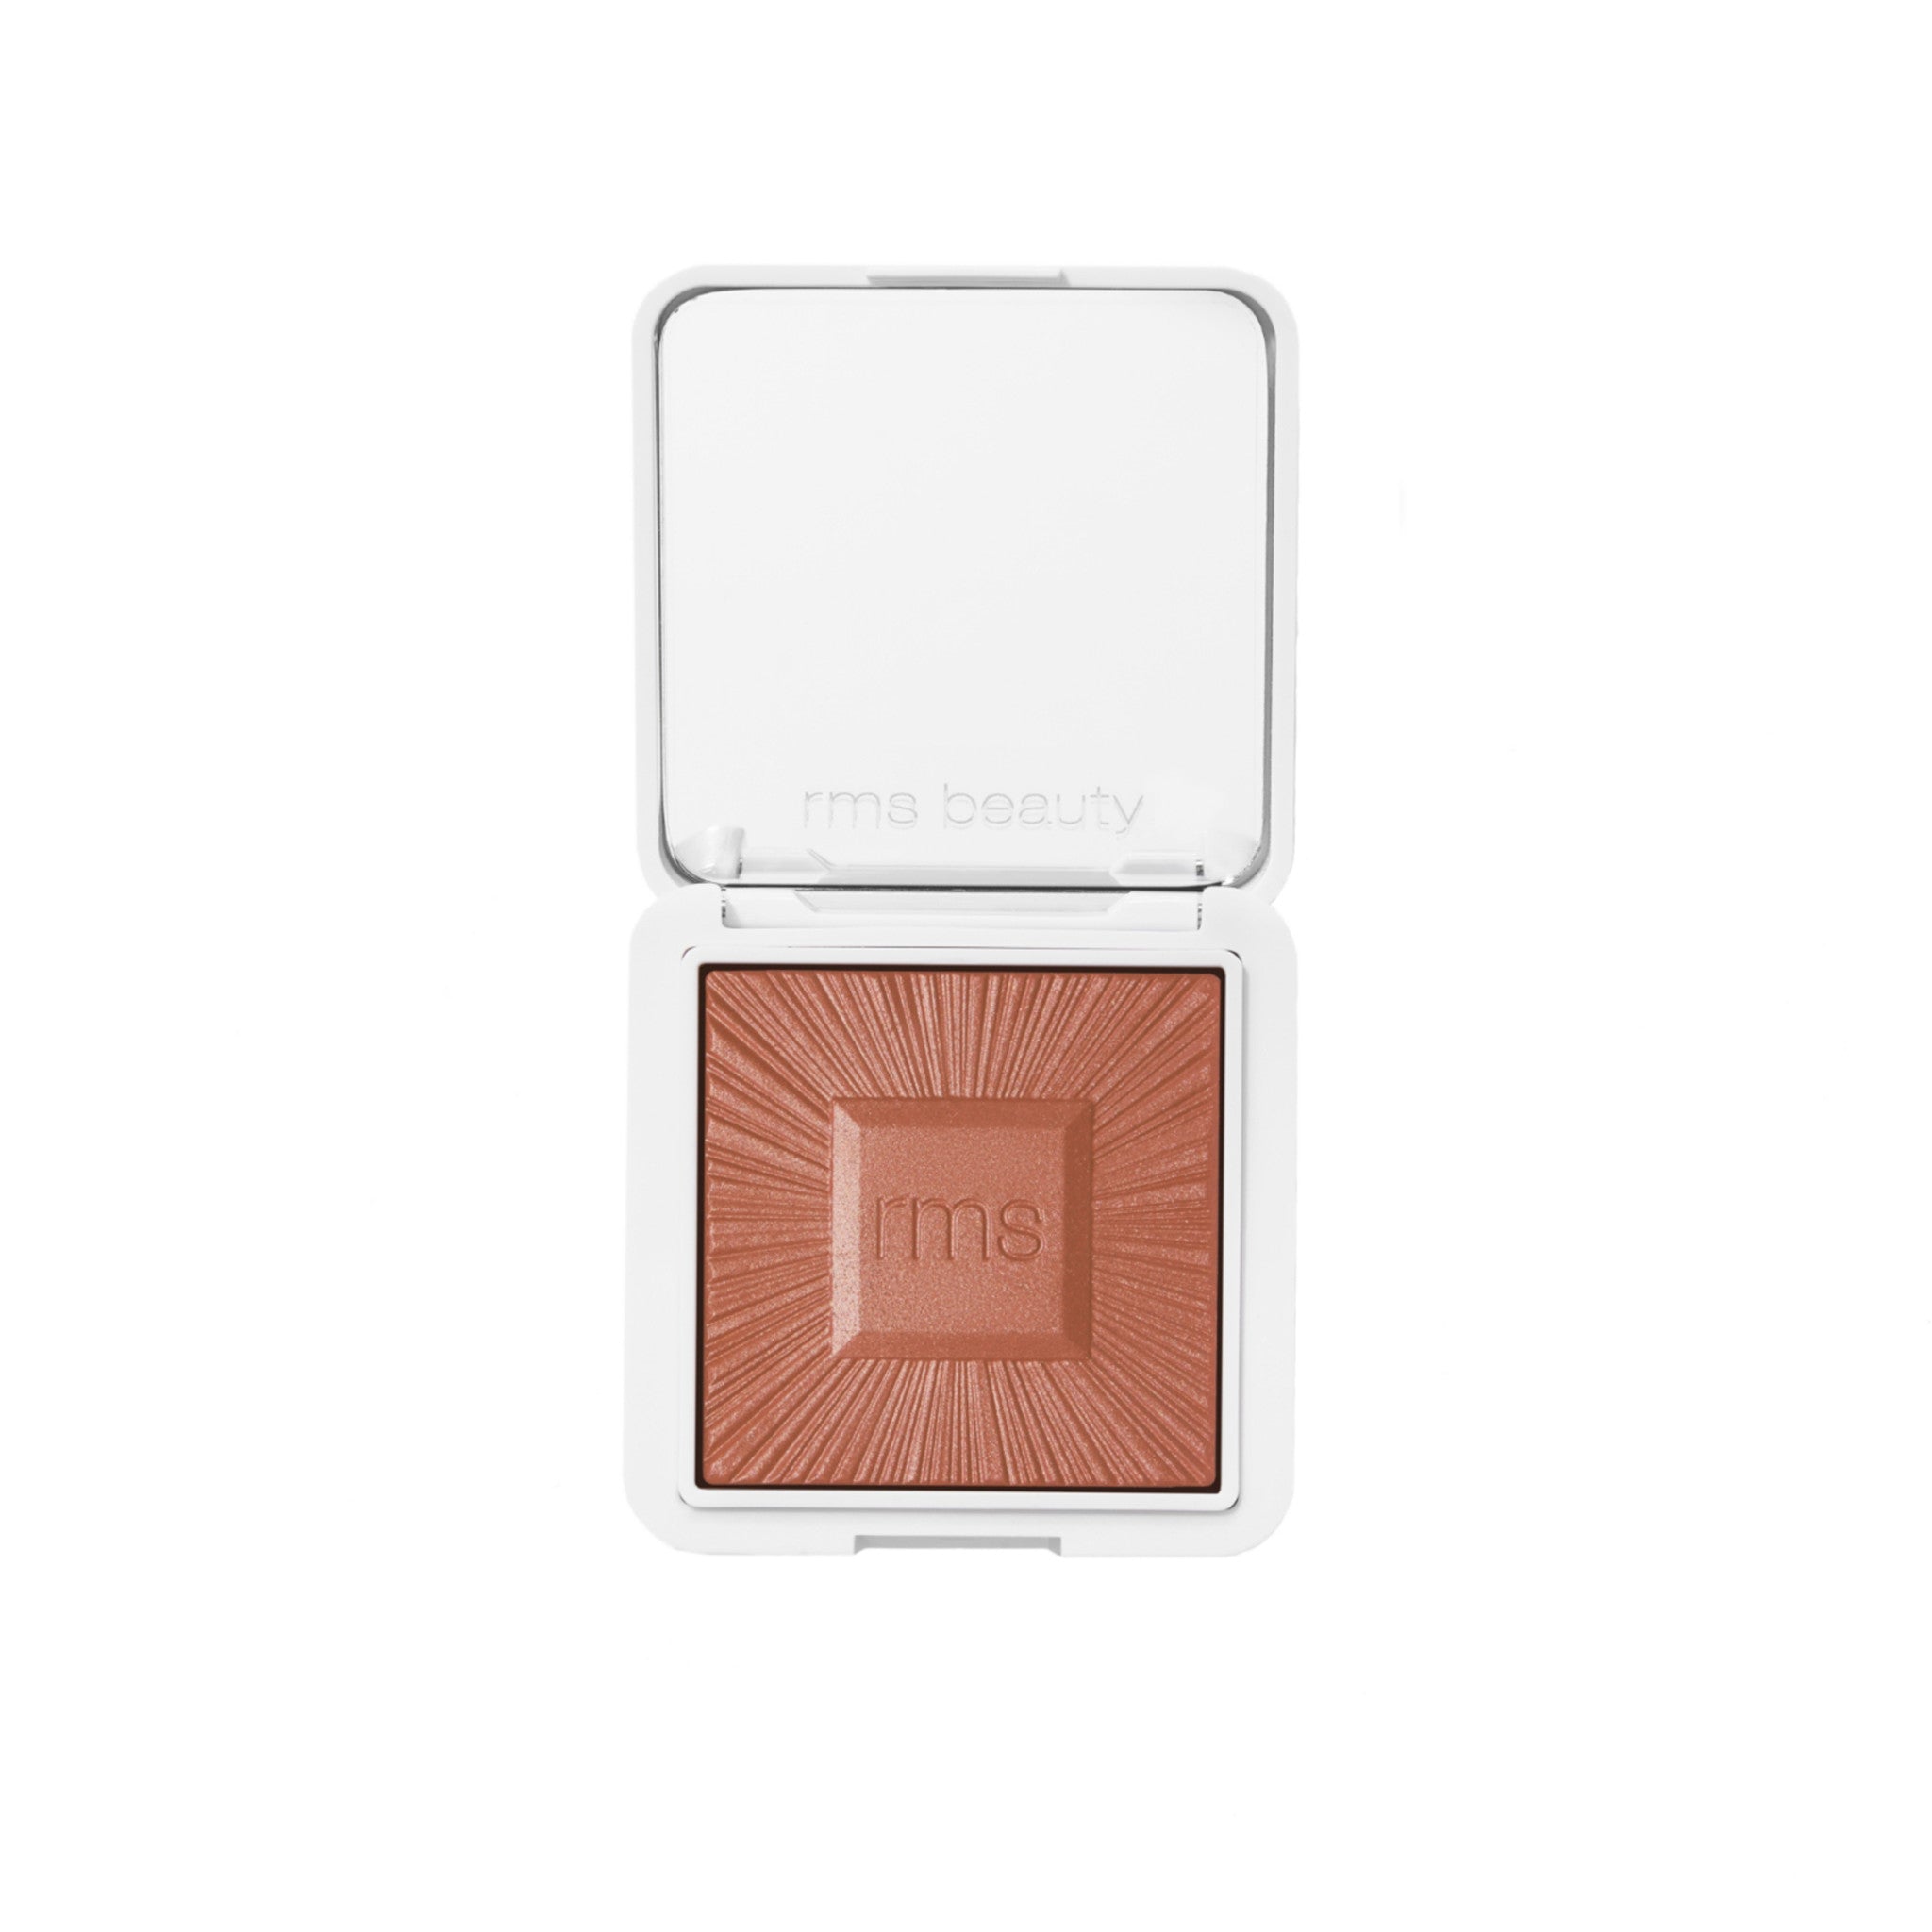 RMS Beauty ReDimension Hydra Bronzer Color/Shade variant: Beachwalk Betty main image. This product is for light complexions